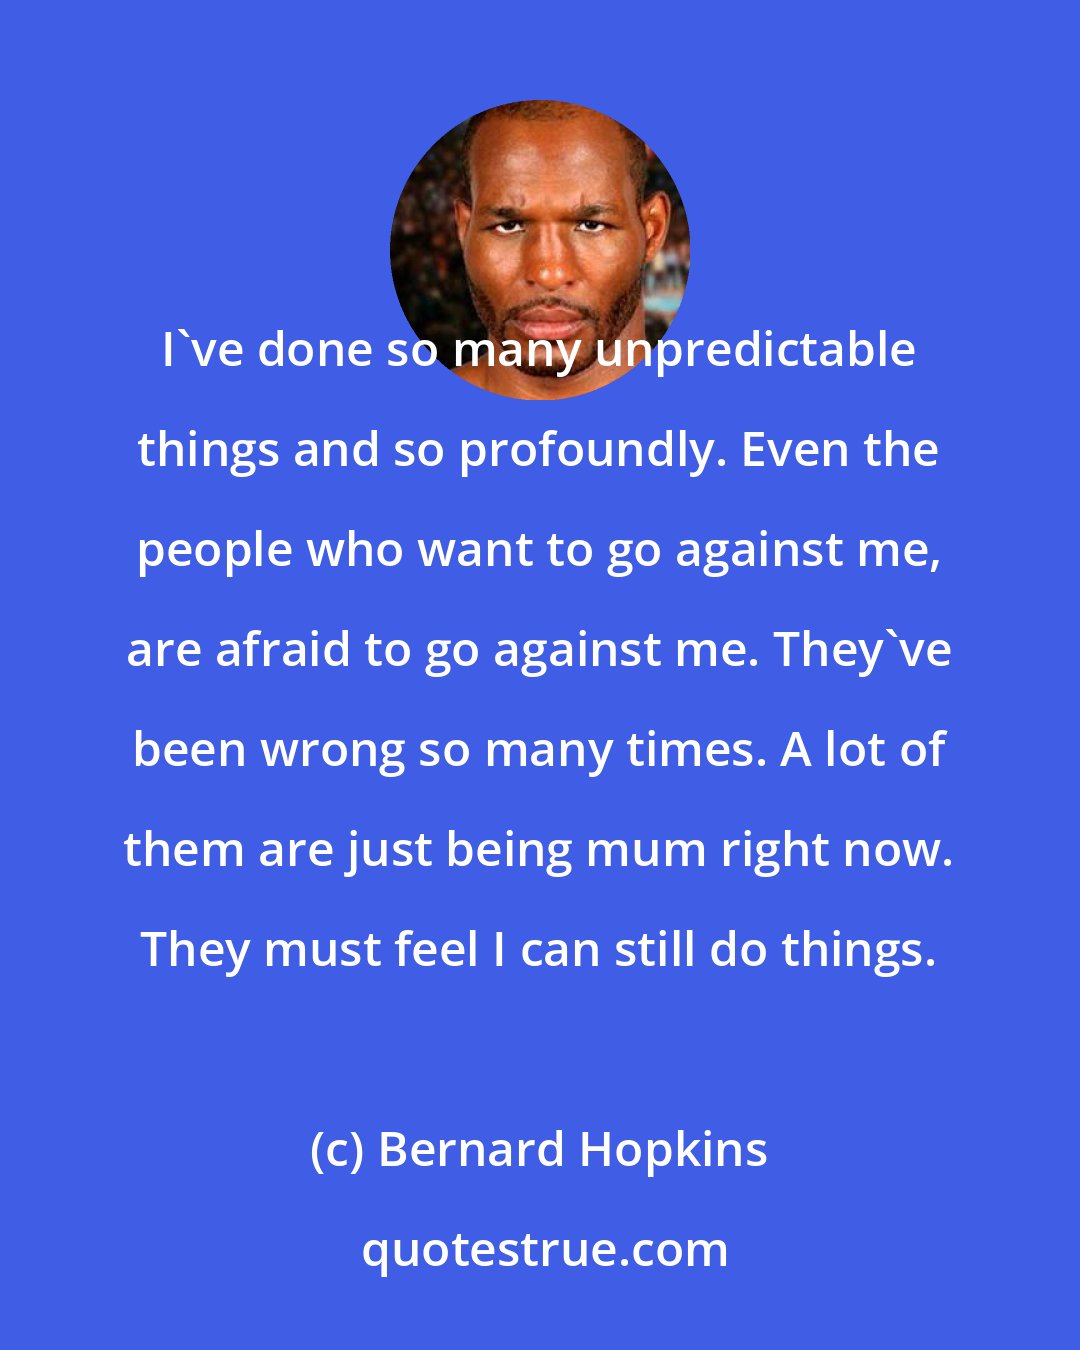 Bernard Hopkins: I've done so many unpredictable things and so profoundly. Even the people who want to go against me, are afraid to go against me. They've been wrong so many times. A lot of them are just being mum right now. They must feel I can still do things.